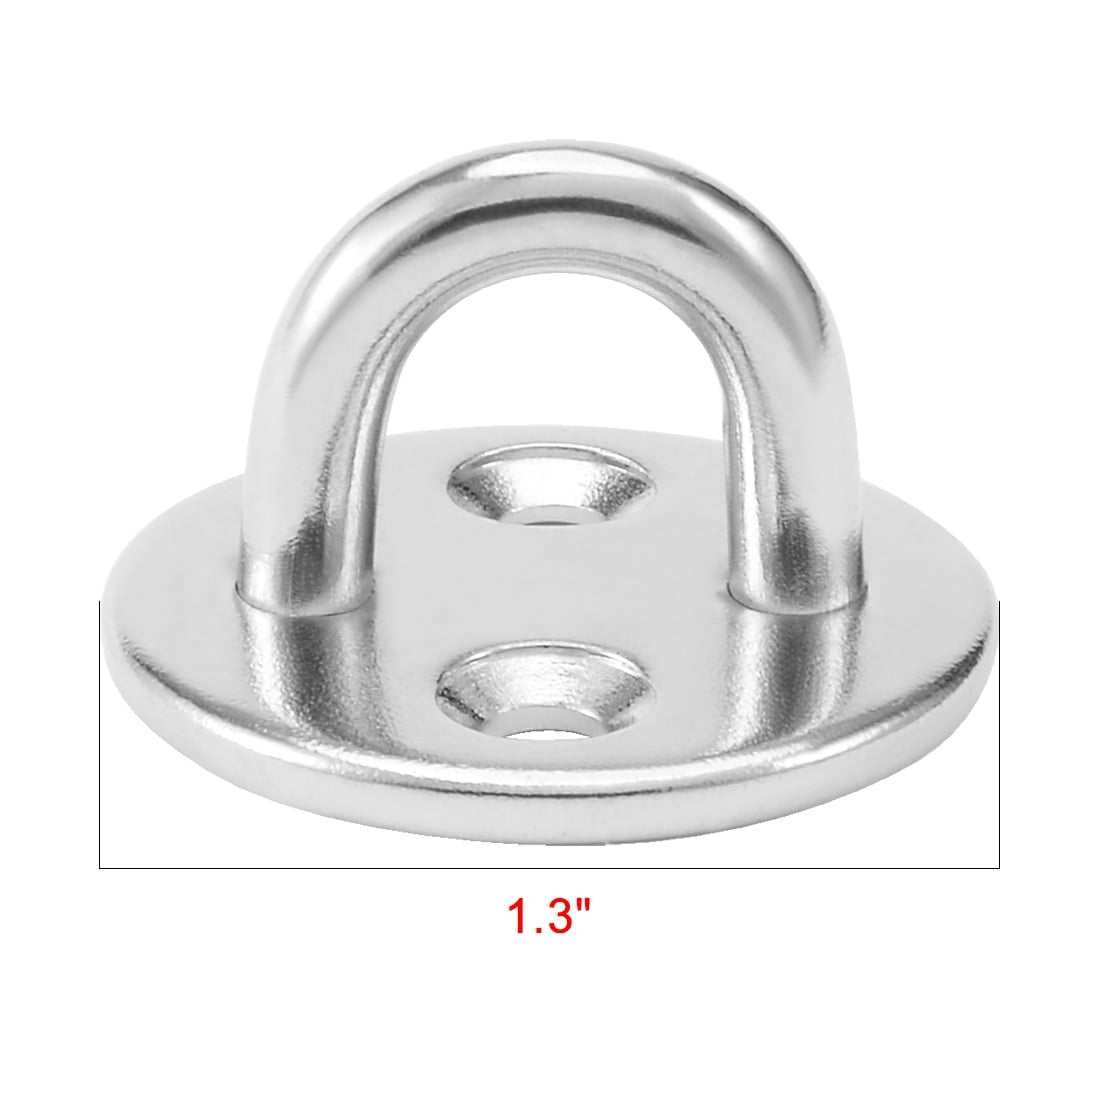 MroMax 4Pcs Eye Plate M5 304 Stainless Steel 45x15mm Base Open Ring Oblong Sail Shade Pad for Sailing Boating Silver Tone